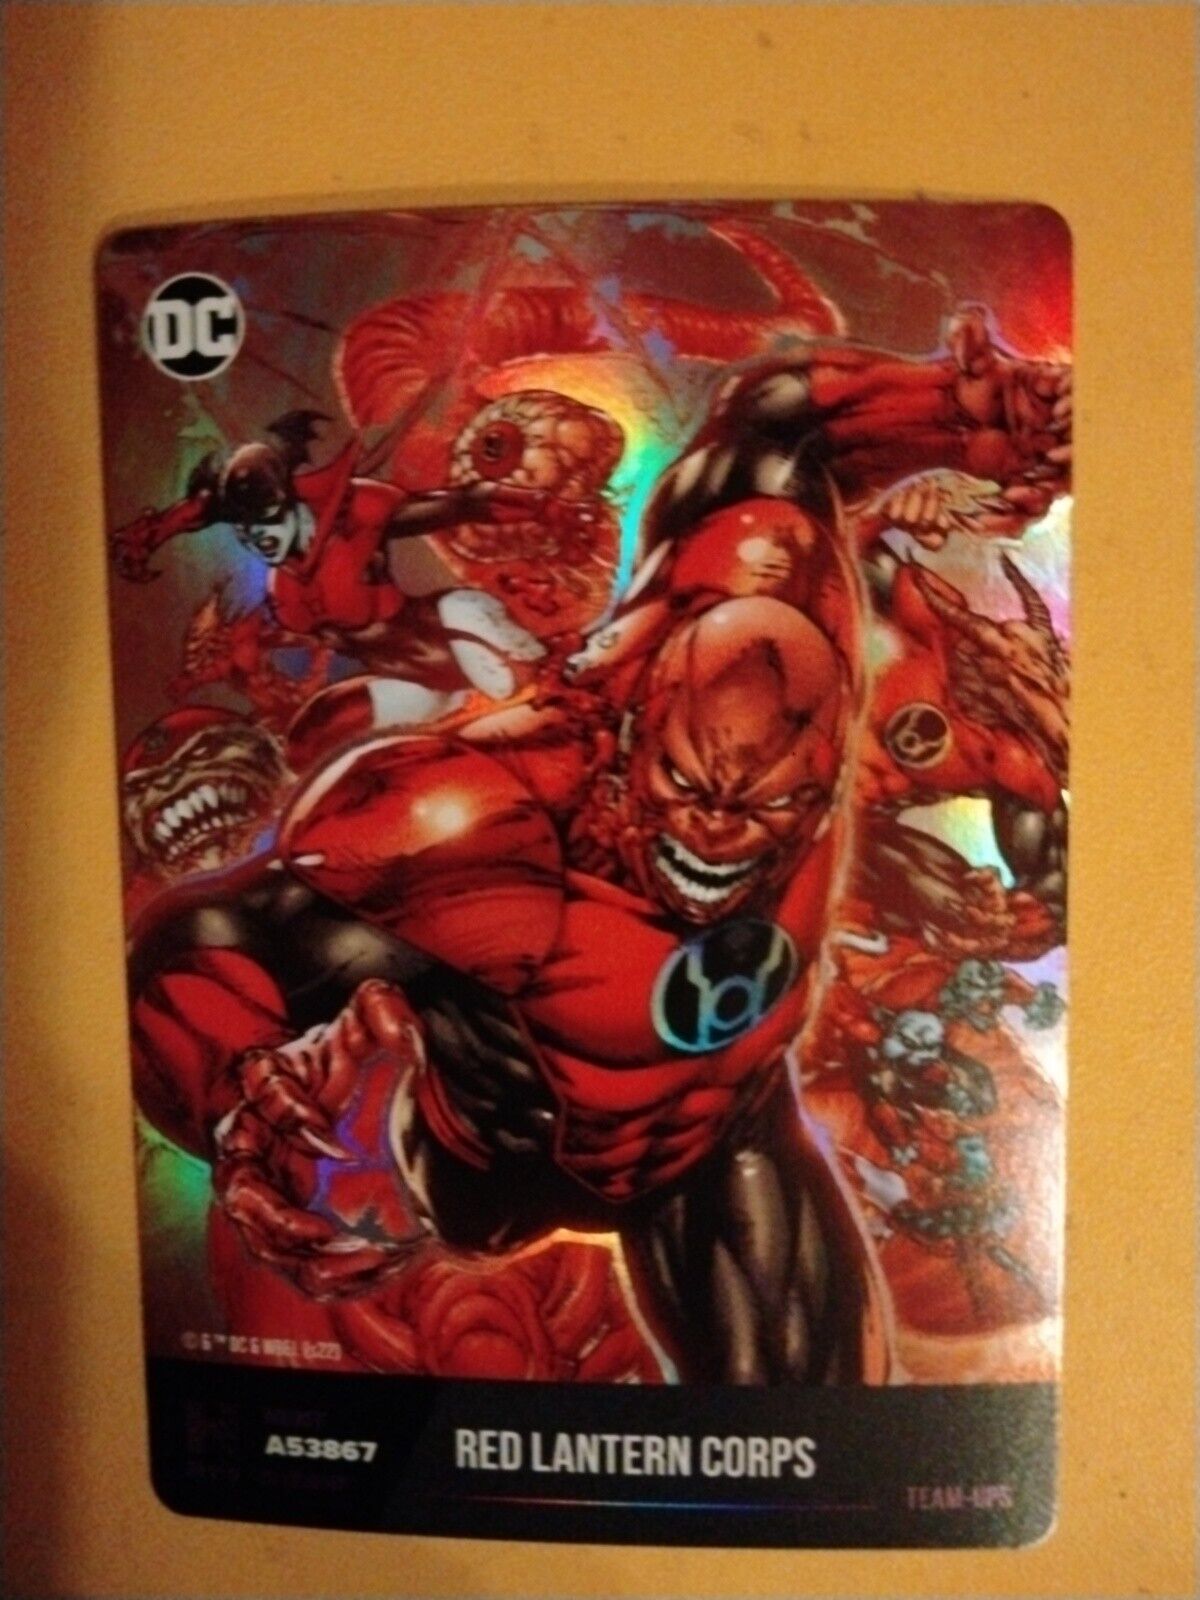 2022 HRO Red Lantern Corps Holo Physical Card only CHAPTER 2 Holo Team Ups